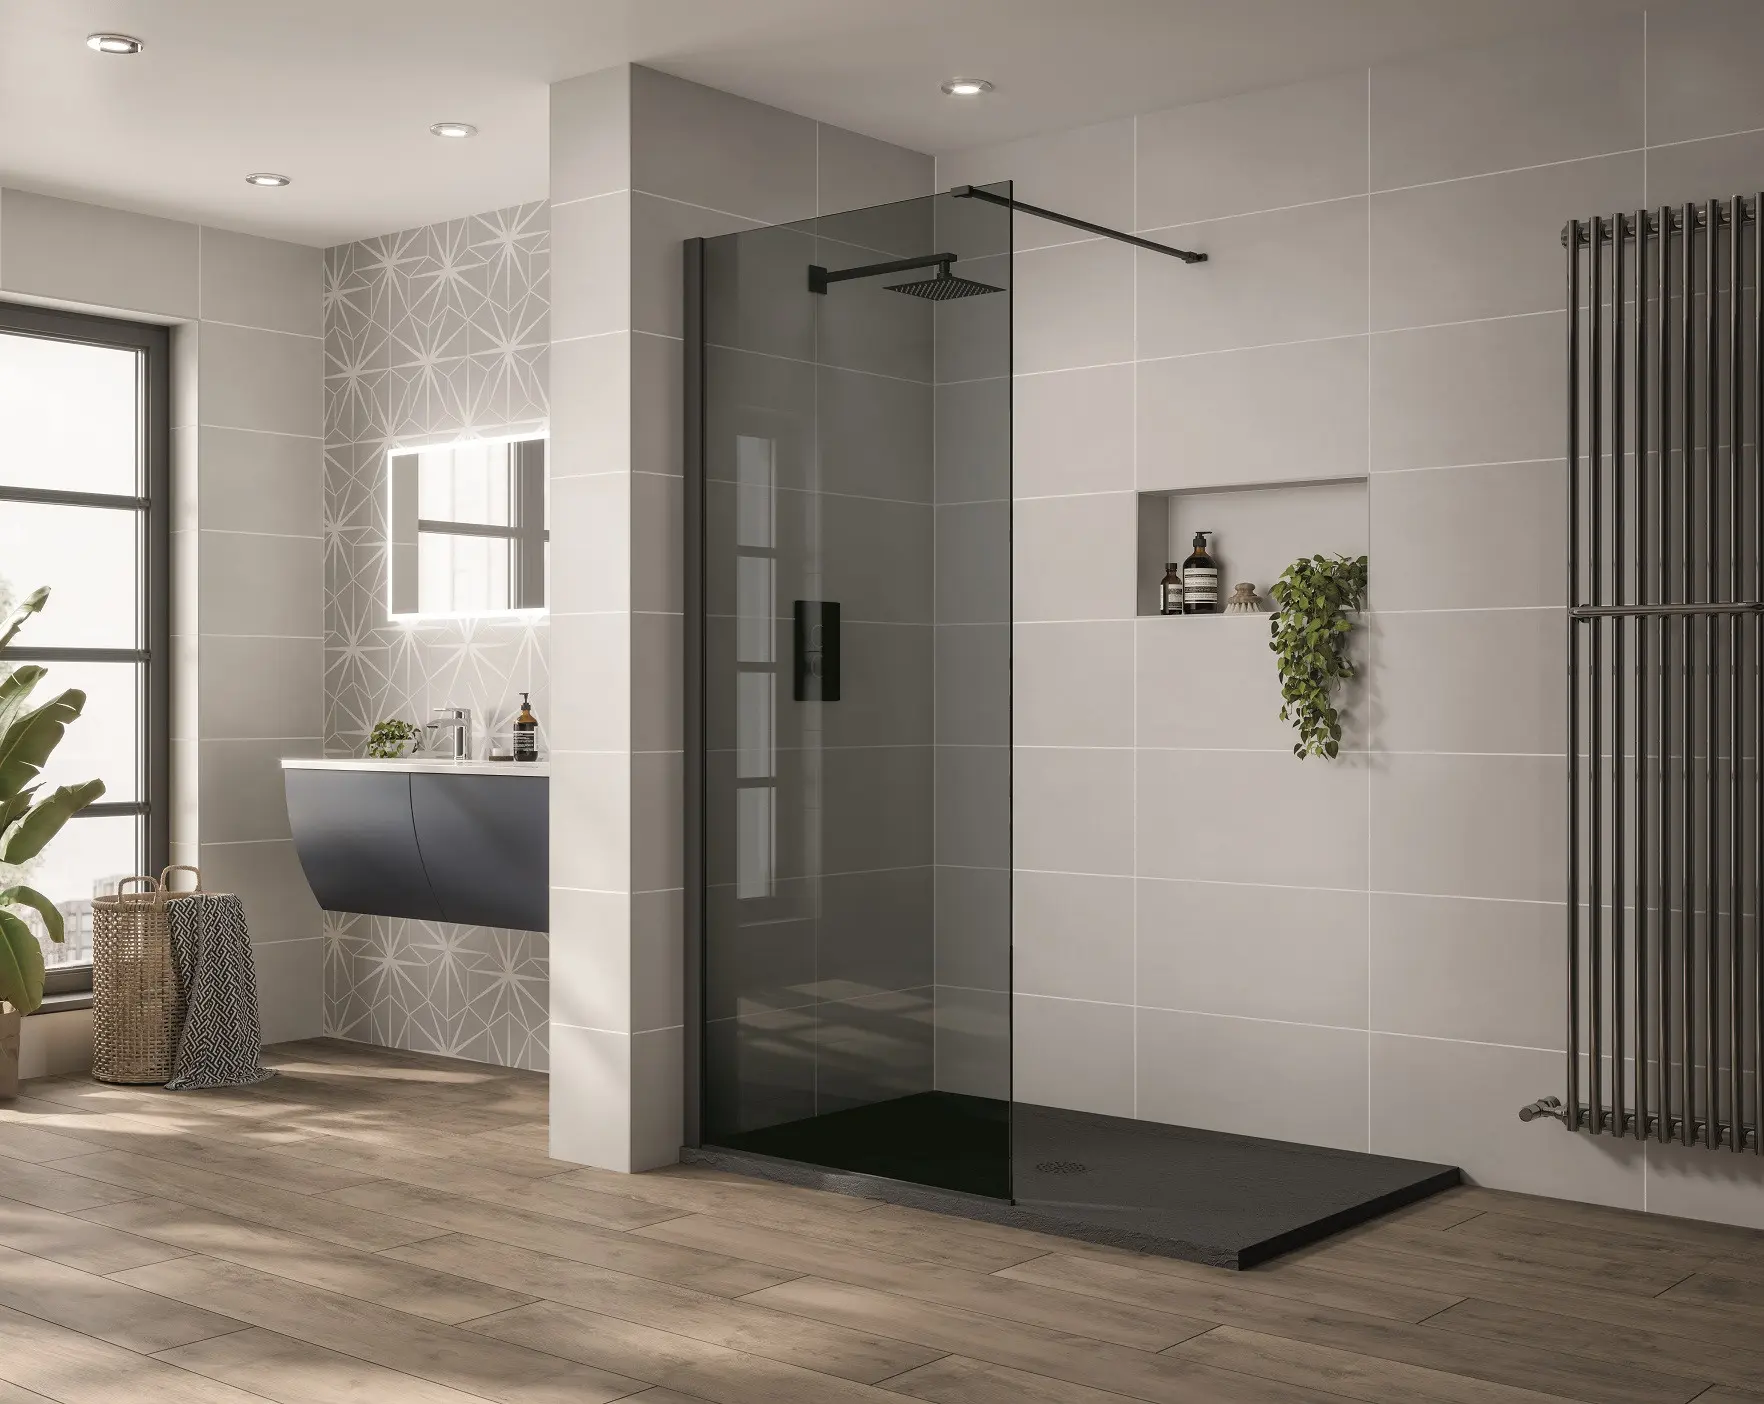 10mm smoked glass shower screen - Are frameless shower screens generally 10 mm thick